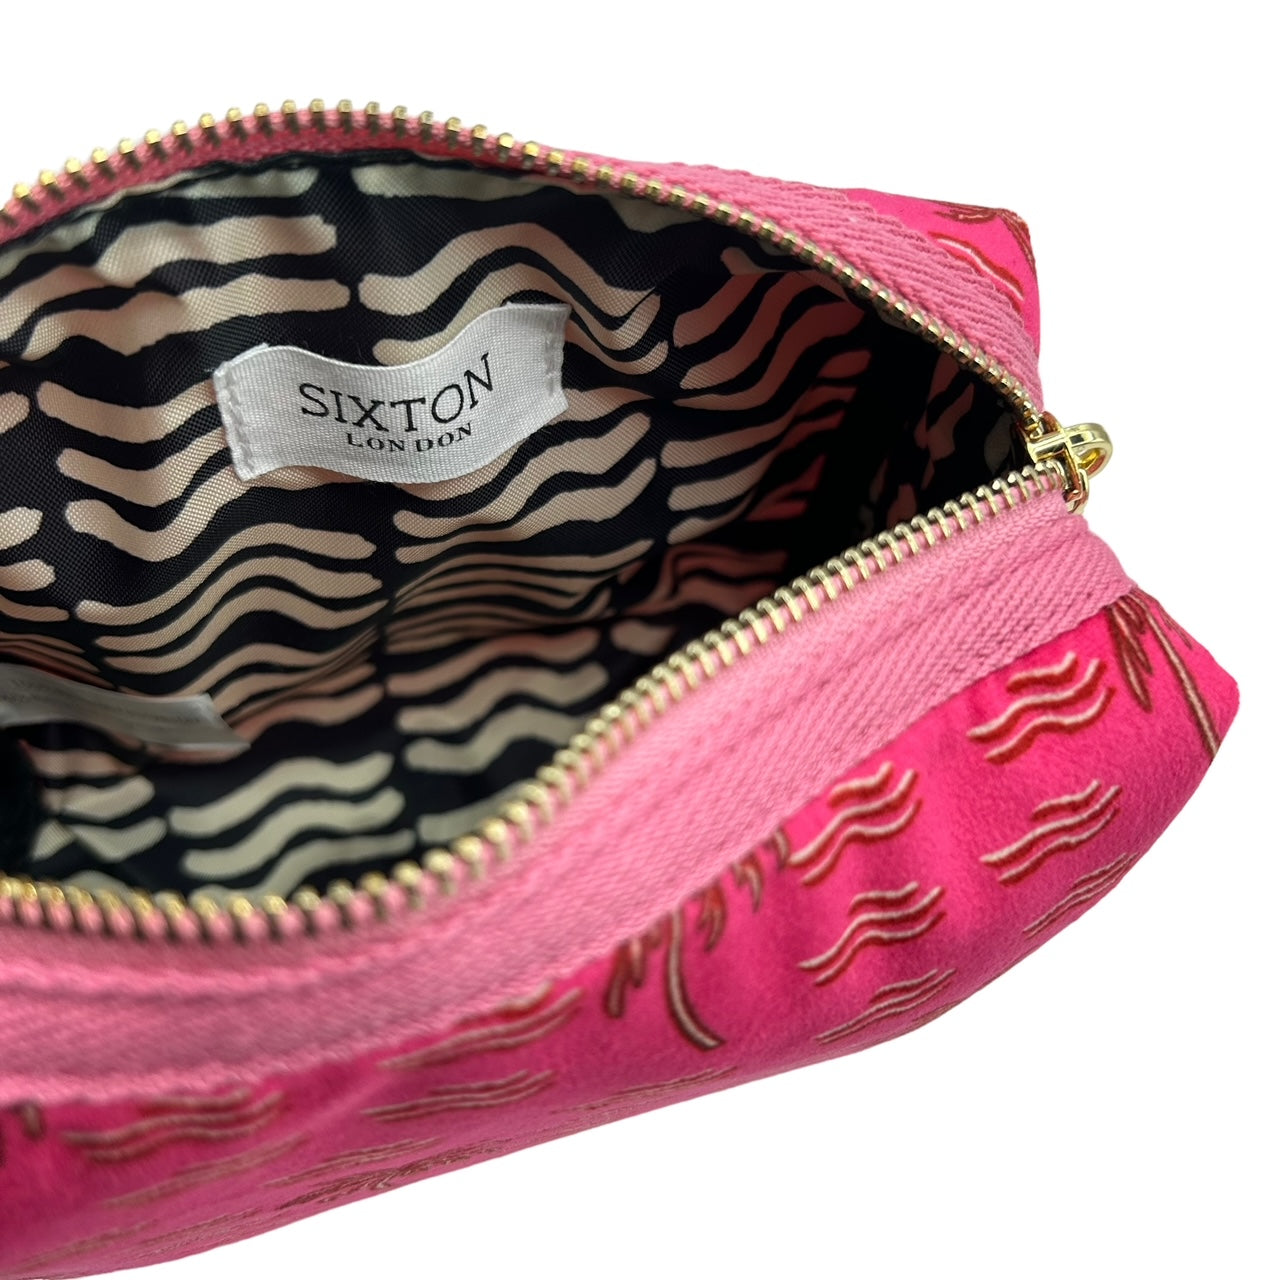 Pink palm large make-up bag & tiger brooch - recycled velvet, large and small